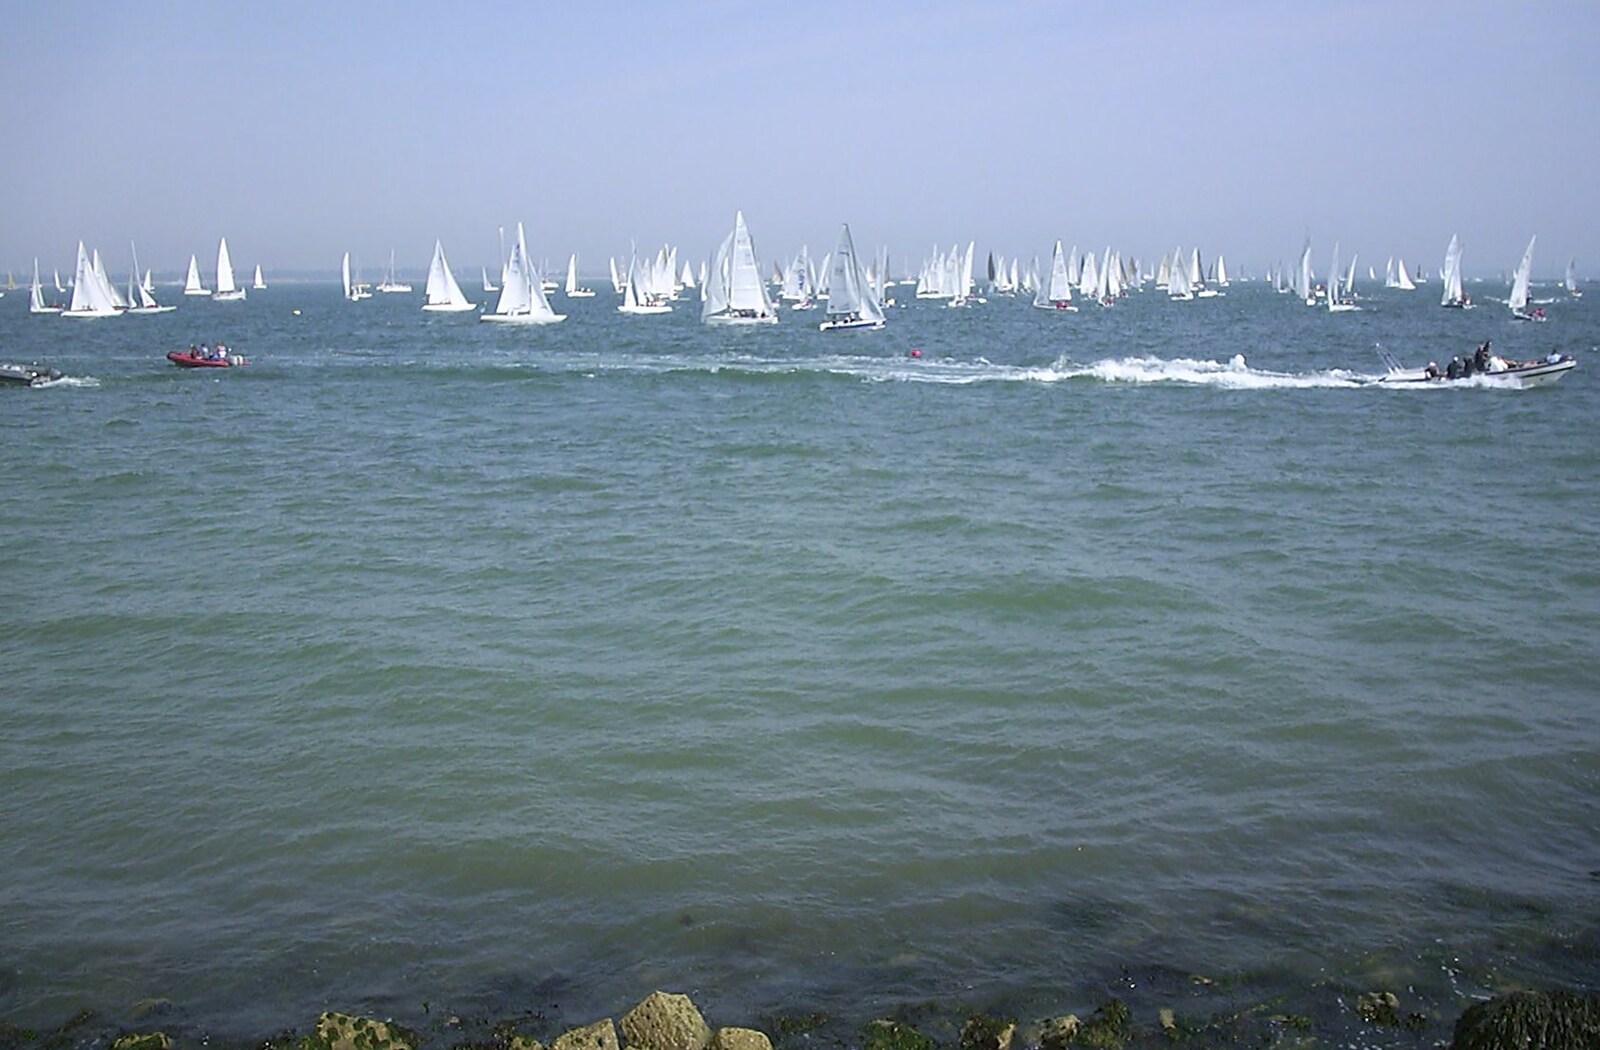 Some racing occurs from Cowes Weekend, Cowes, Isle of Wight - 7th August 2004